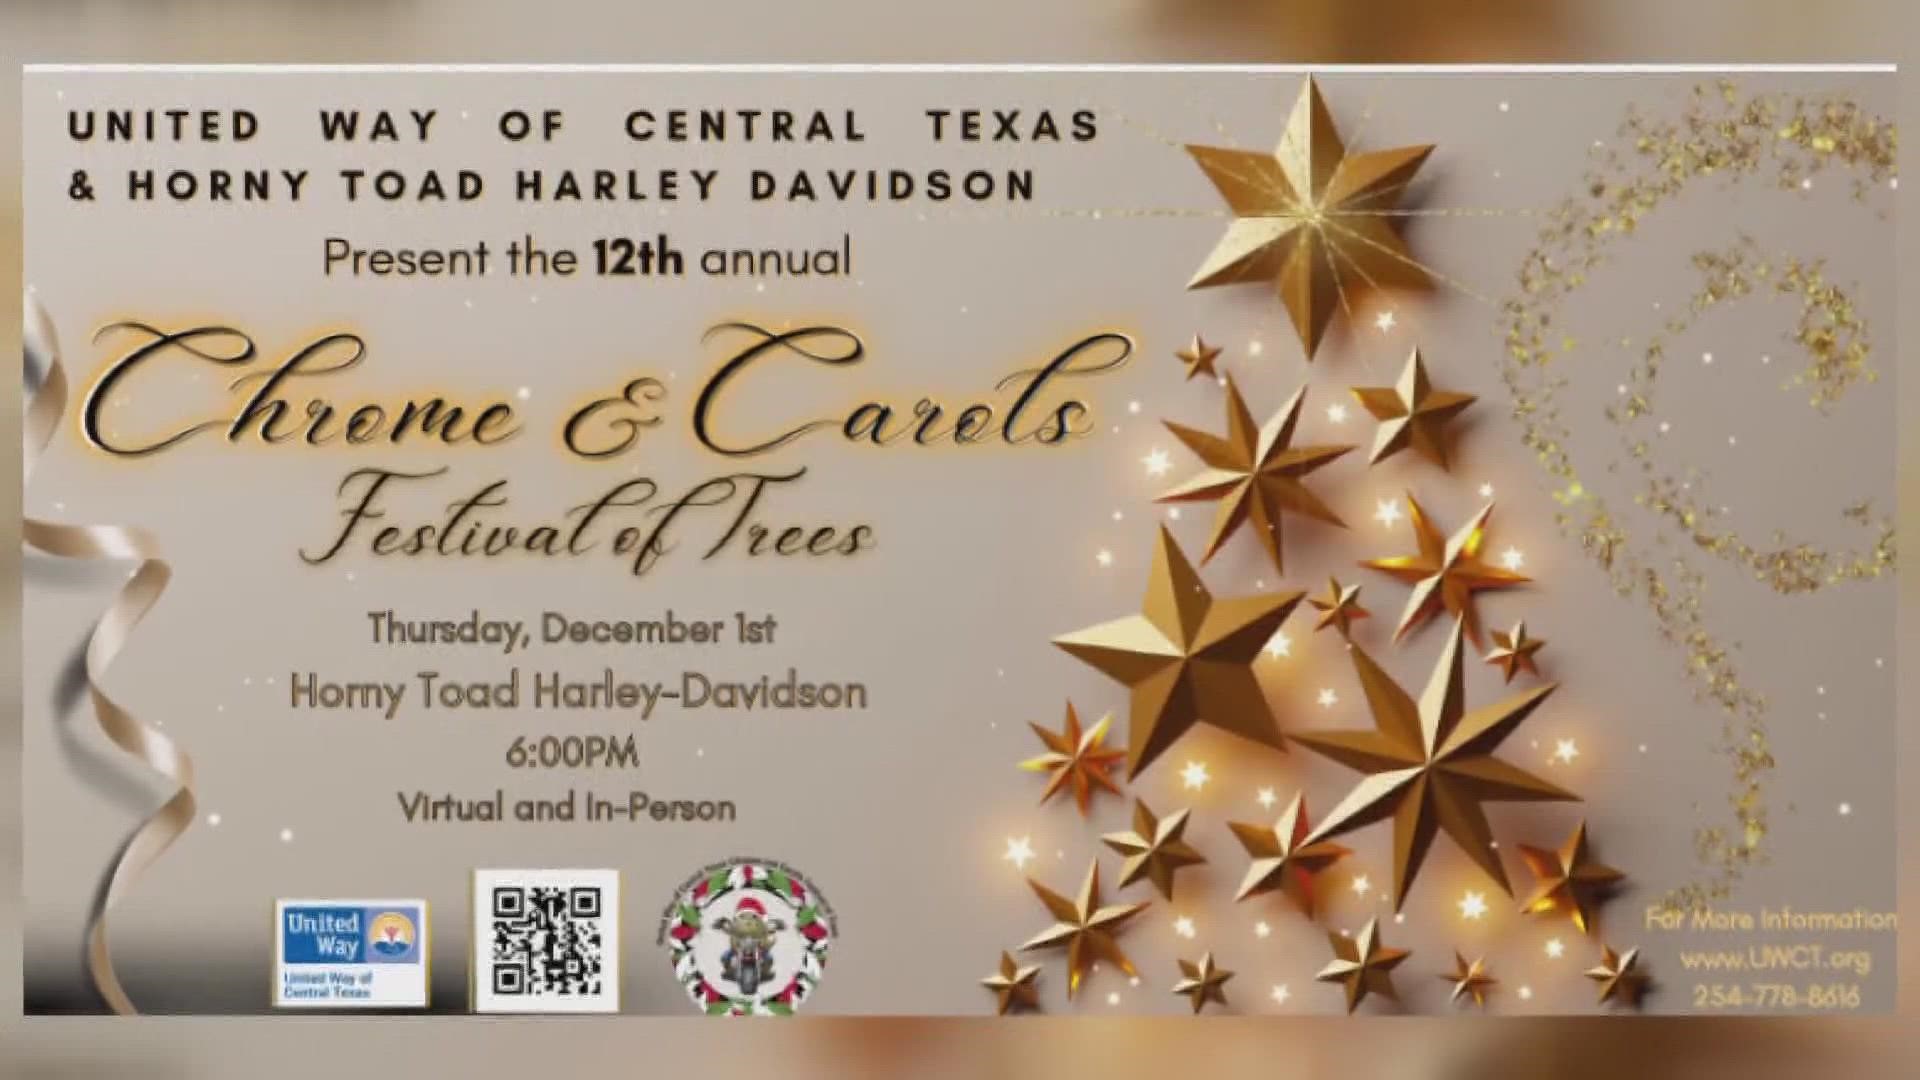 Help support the United Way by getting virtual tickets to Chrome and Carols for this Thursday.